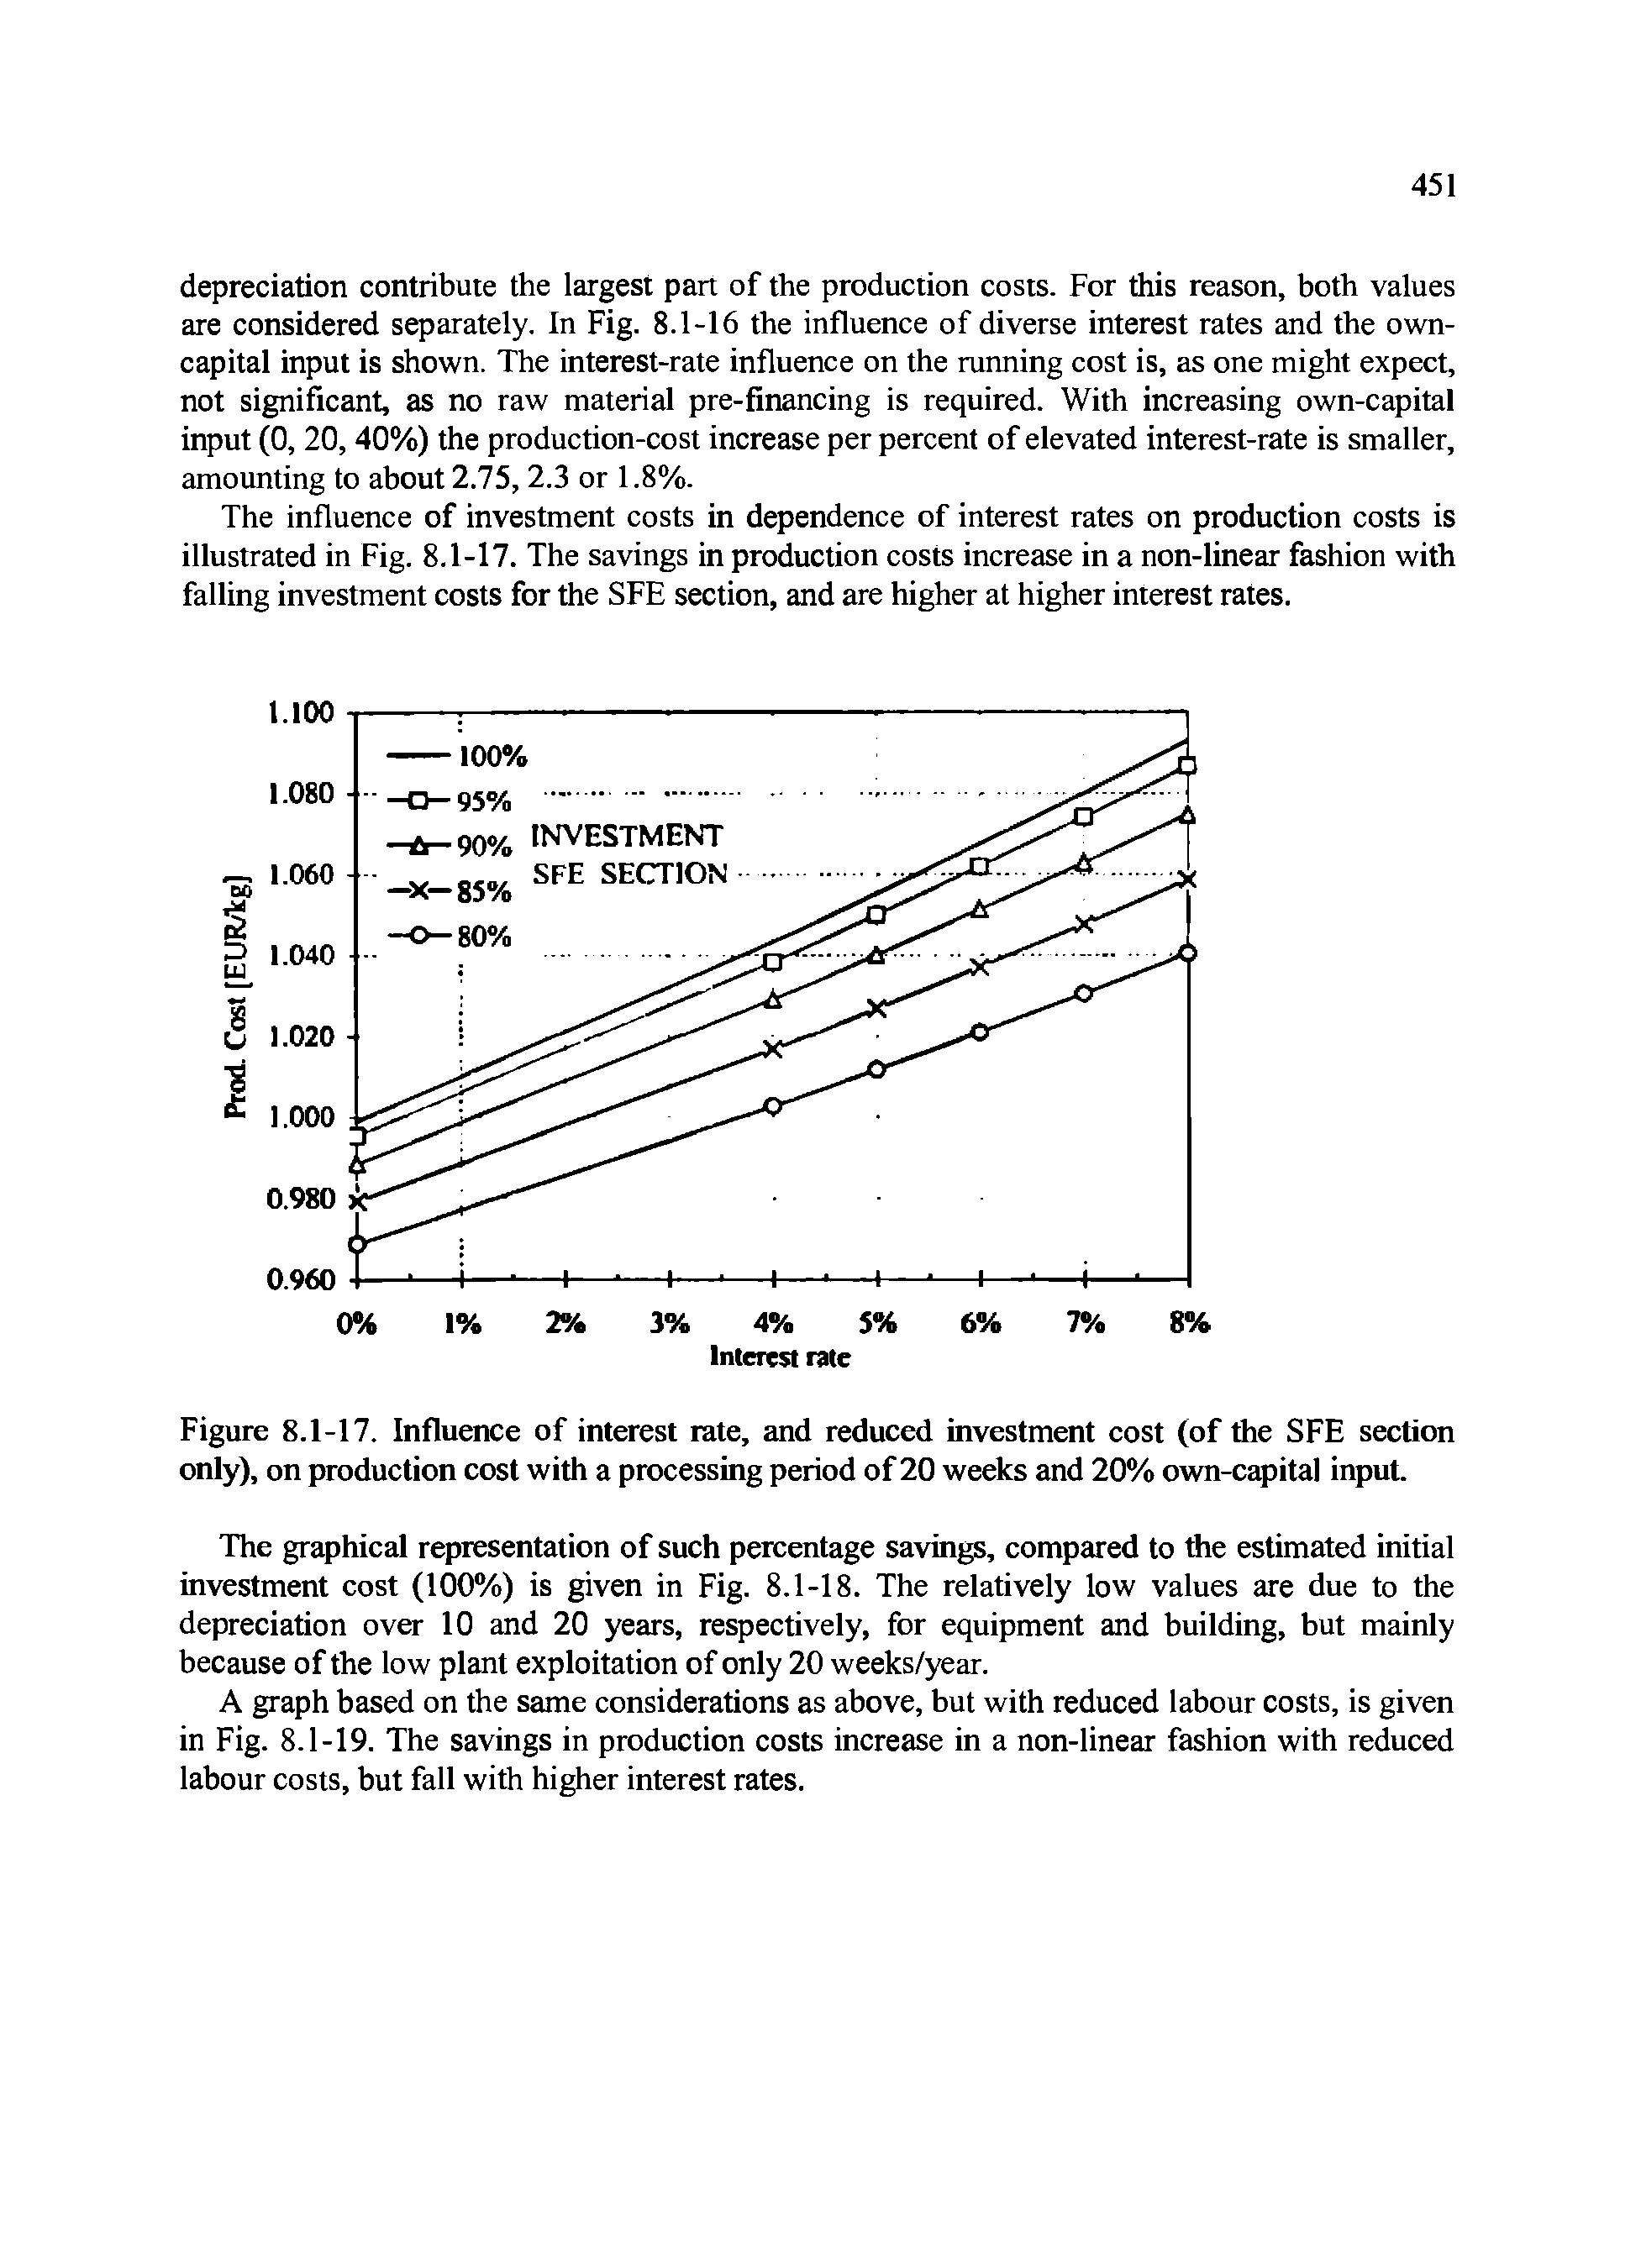 Figure 8.1-17. Influence of interest rate, and reduced investment cost (of the SFE section only), on production cost with a processing period of 20 weeks and 20% own-capital input.